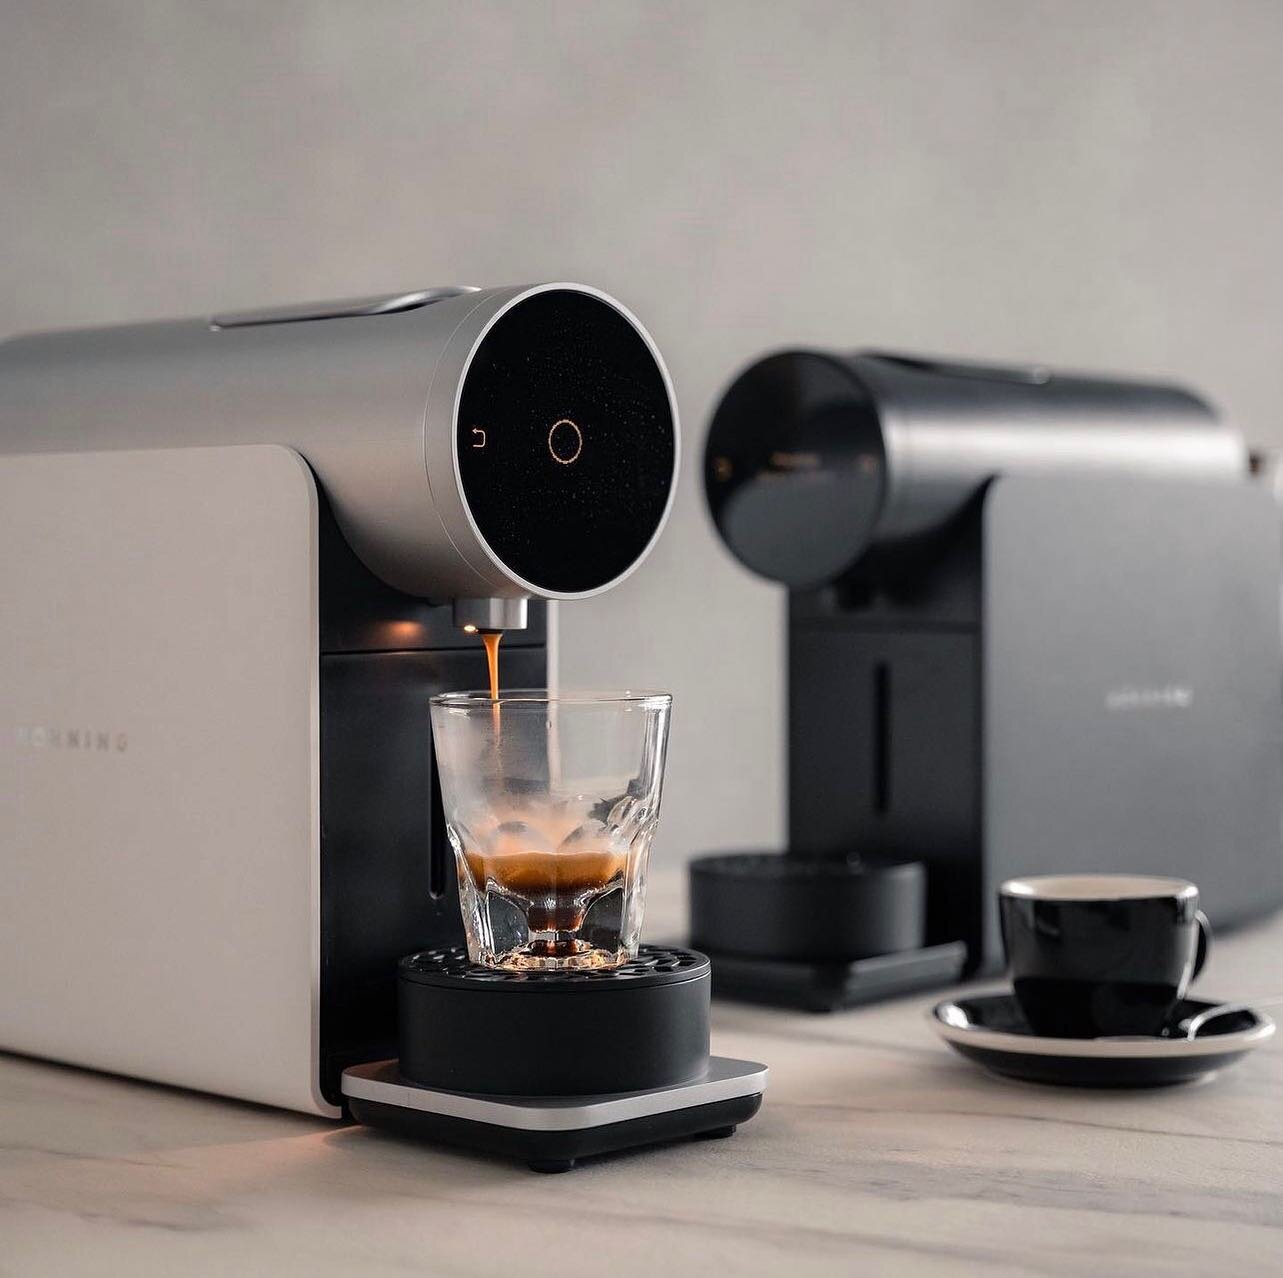 Thinking of getting a capsule machine for your home or office?

The Morning Machine is the new standard in the home coffee experience. With precision-controls that maximise flavours of each cup. Connected for convenience to deliver the perfect cup of